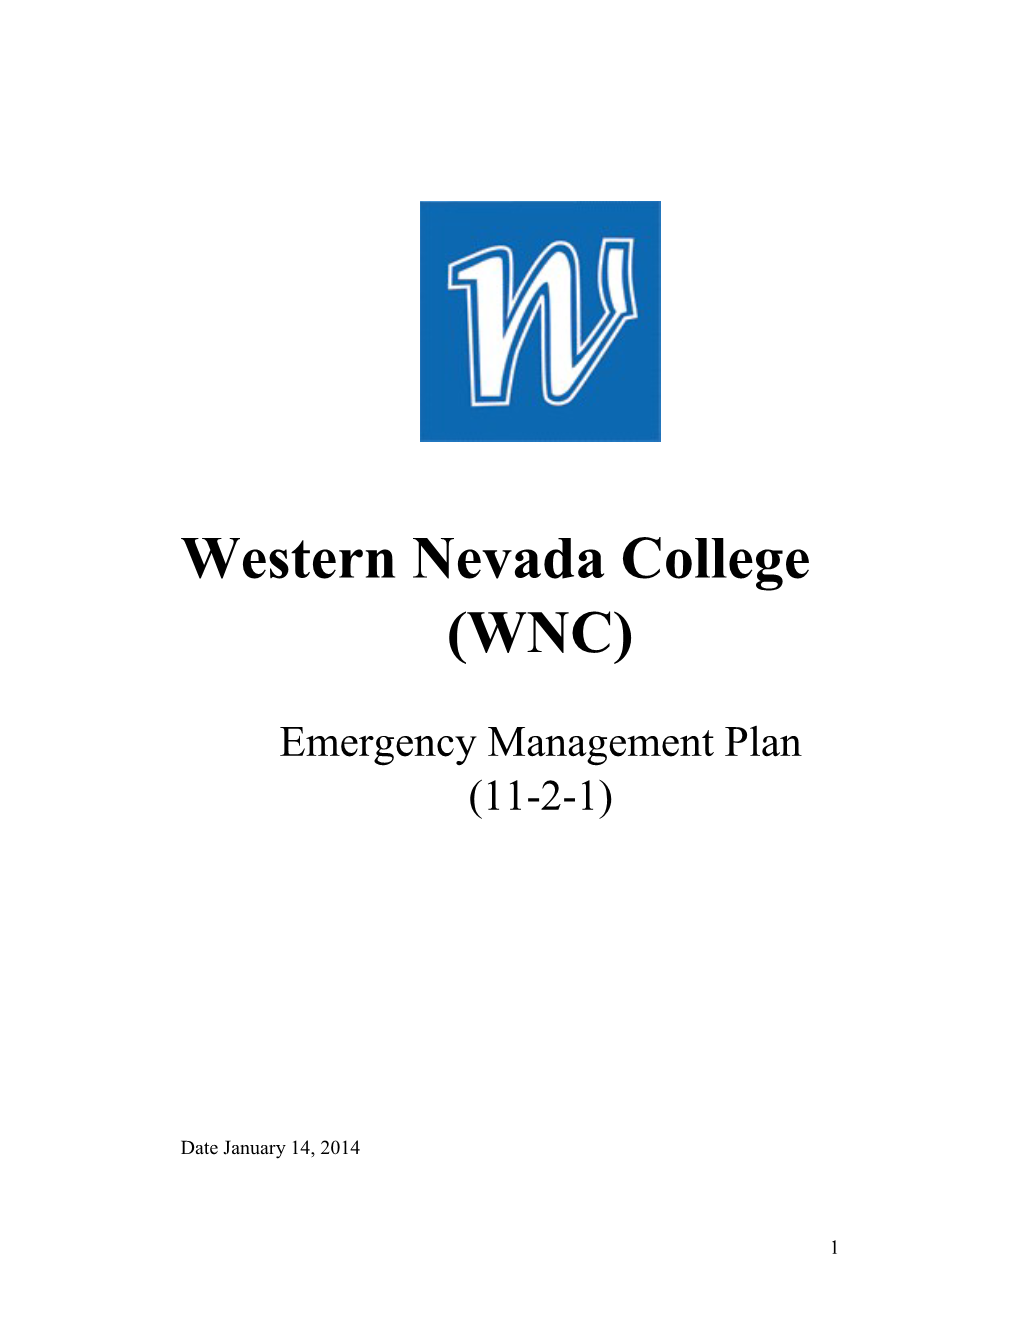 Western Nevada College (WNC) Emergency Management Plan Applies to All Our Campuses